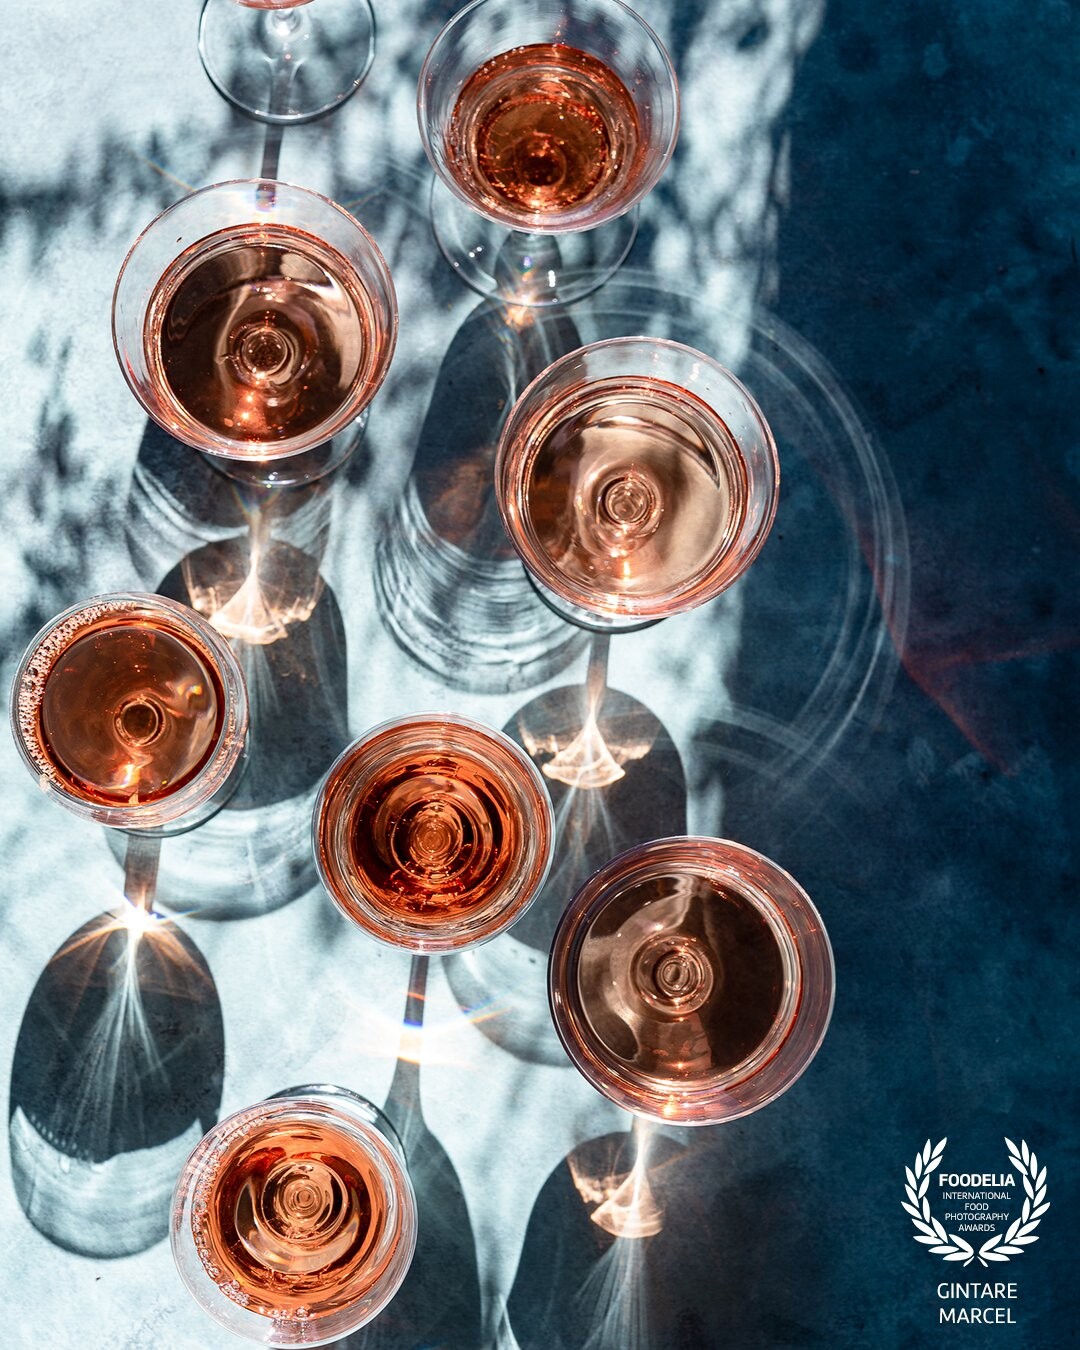 Essentially summer. This image was part of a series to highlight rose wine as the summer drink. For which hard light and creative shadow play worked best to tell the story.